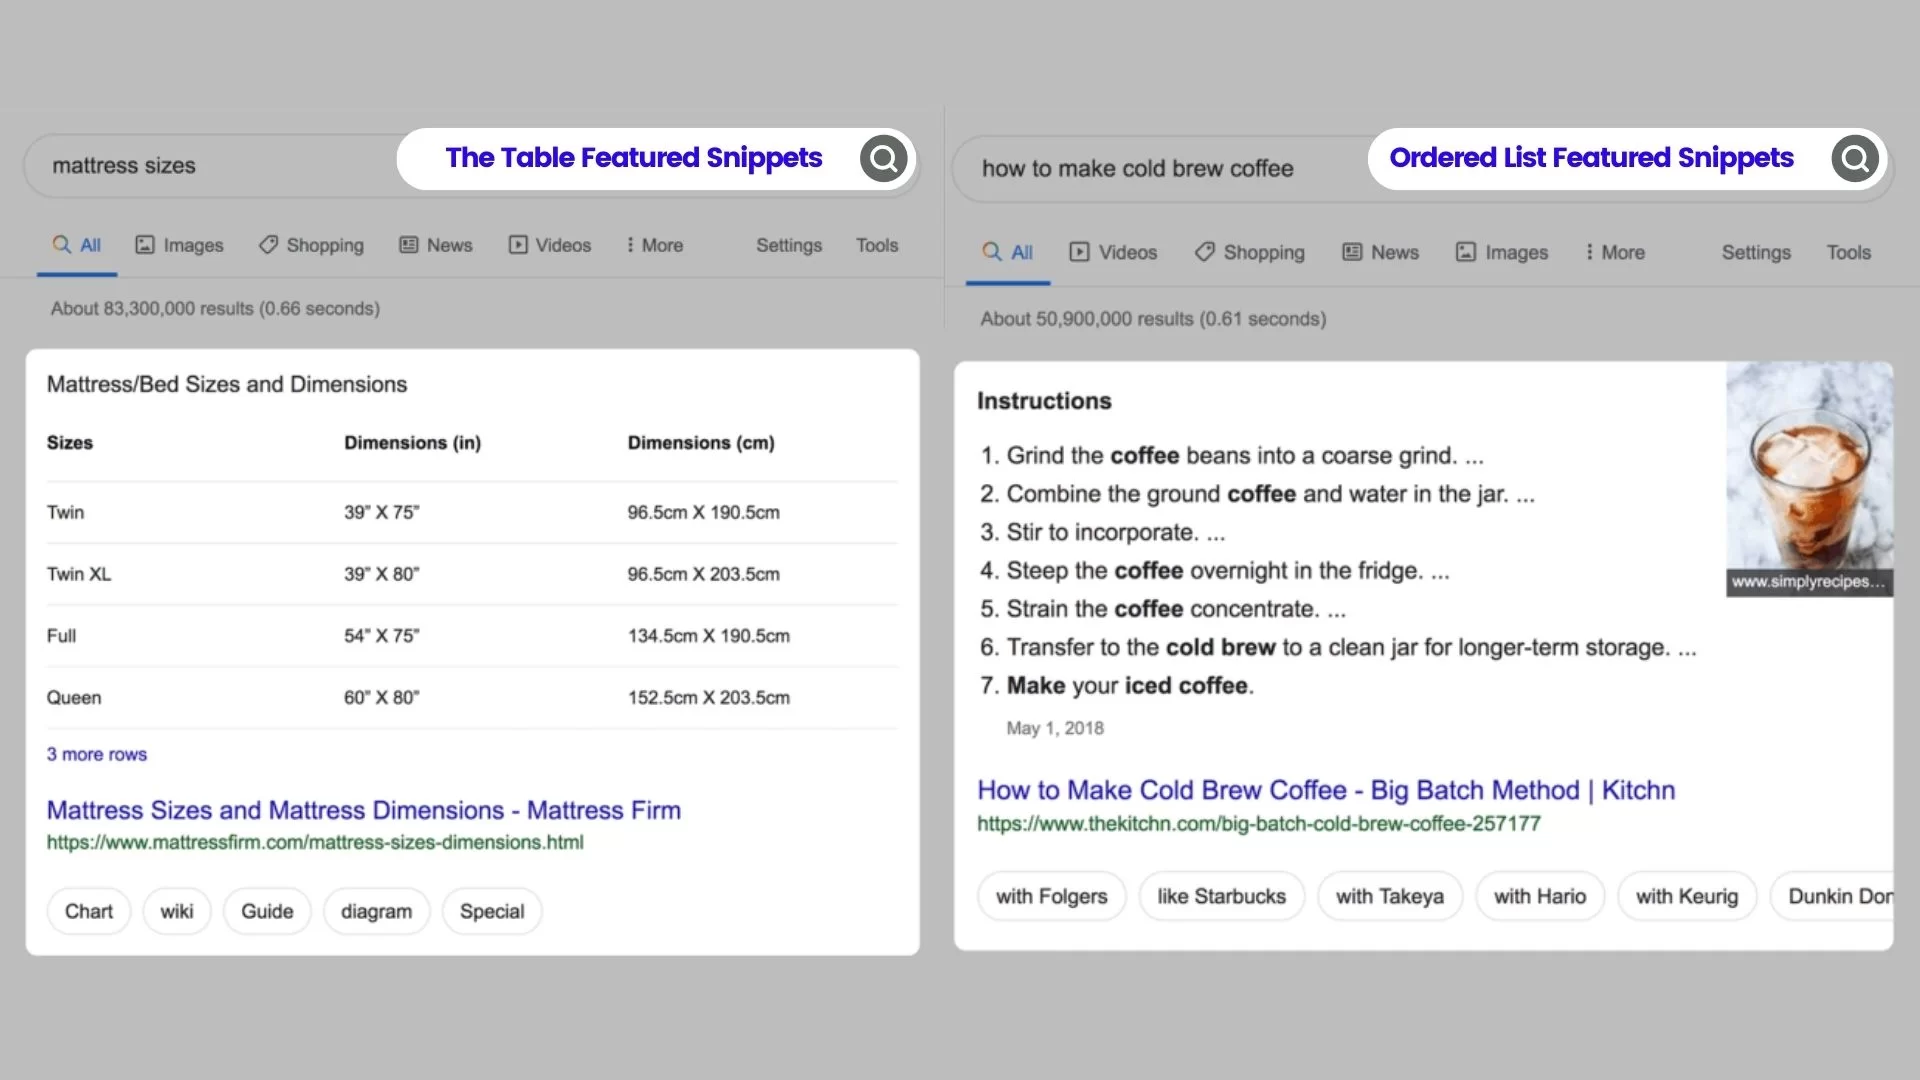 The Table & Ordered List Featured Snippets